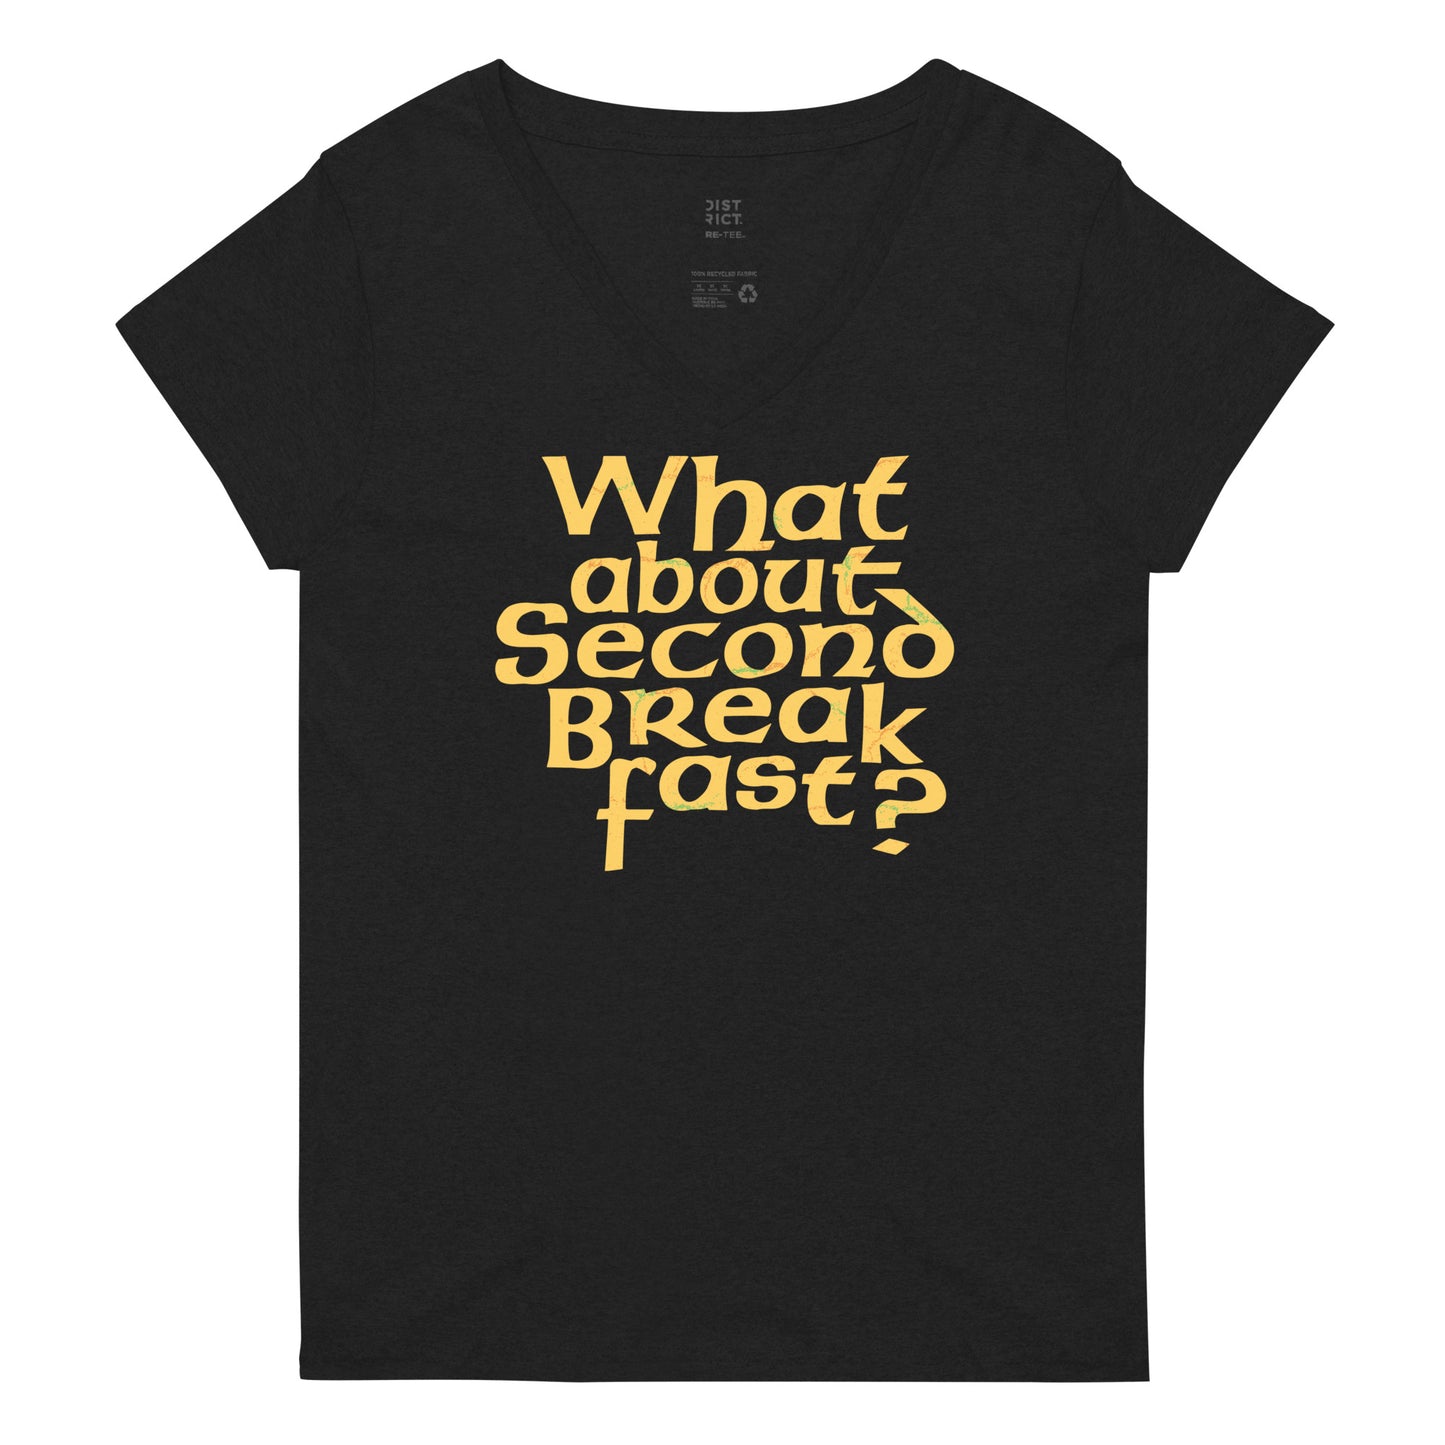 What About Second Breakfast? Women's V-Neck Tee